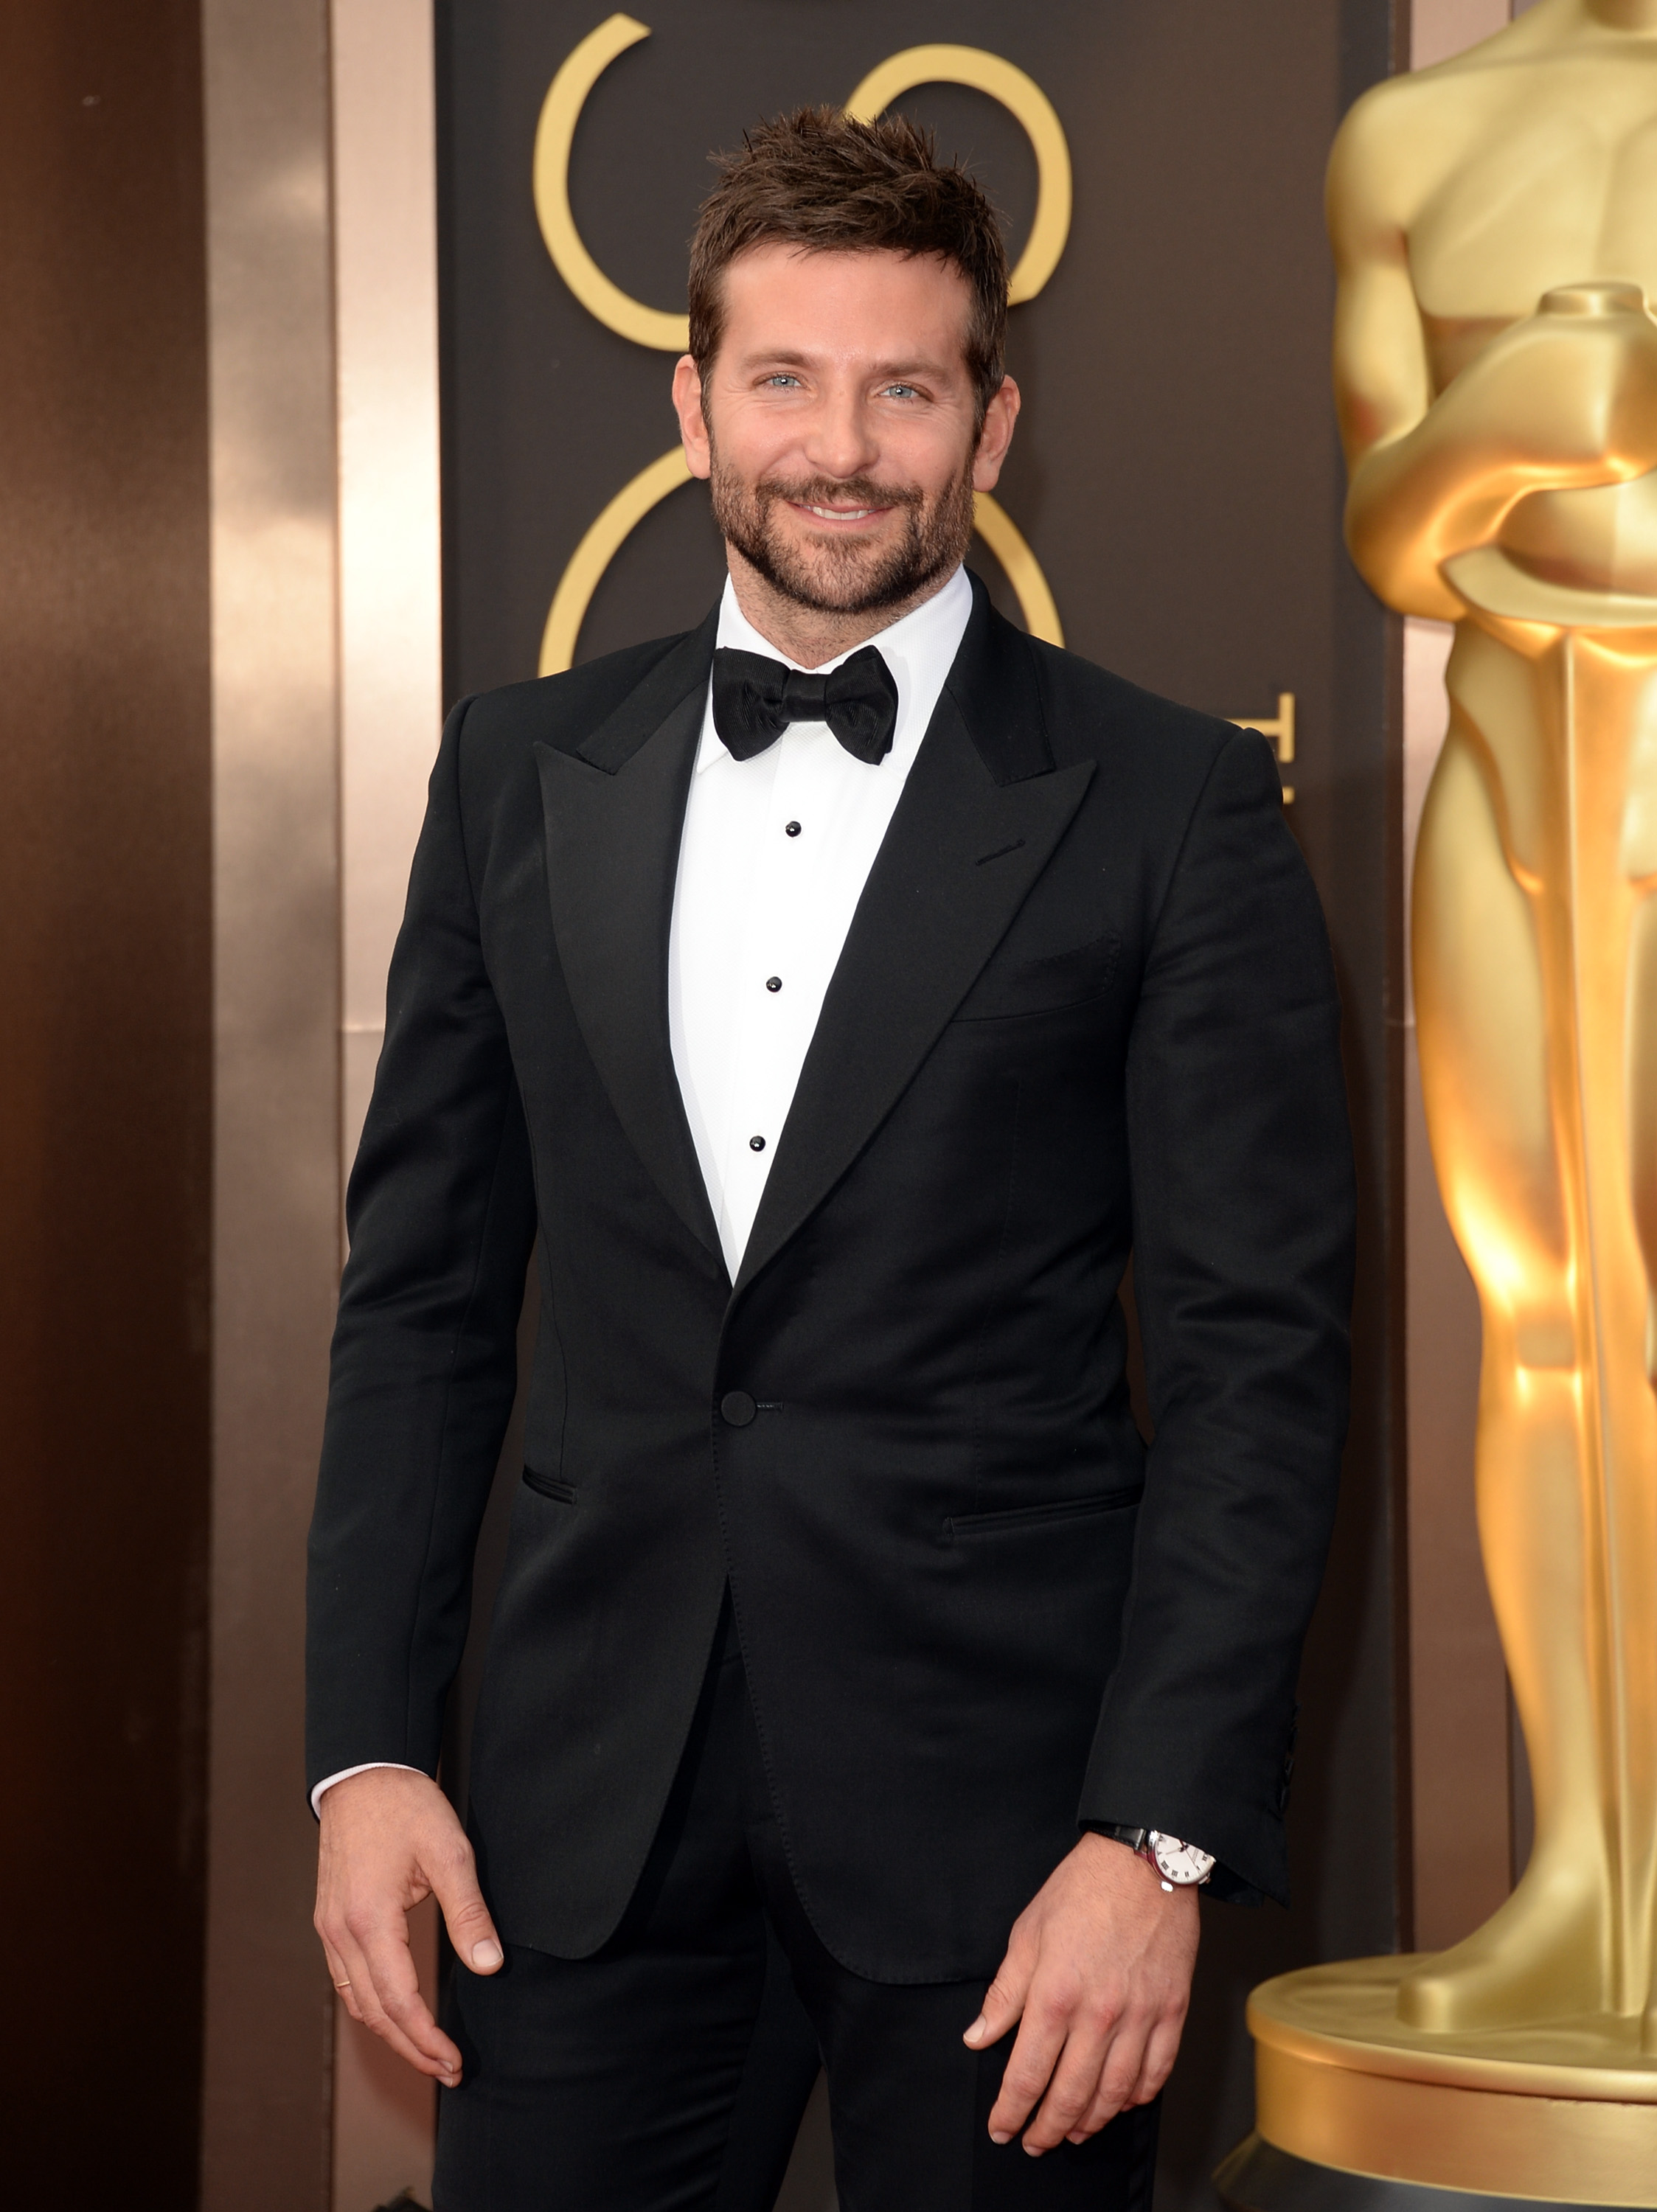 Bradley Cooper at the Oscars held at Hollywood & Highland Center in Hollywood, California on March 2, 2014 | Source: Getty Images